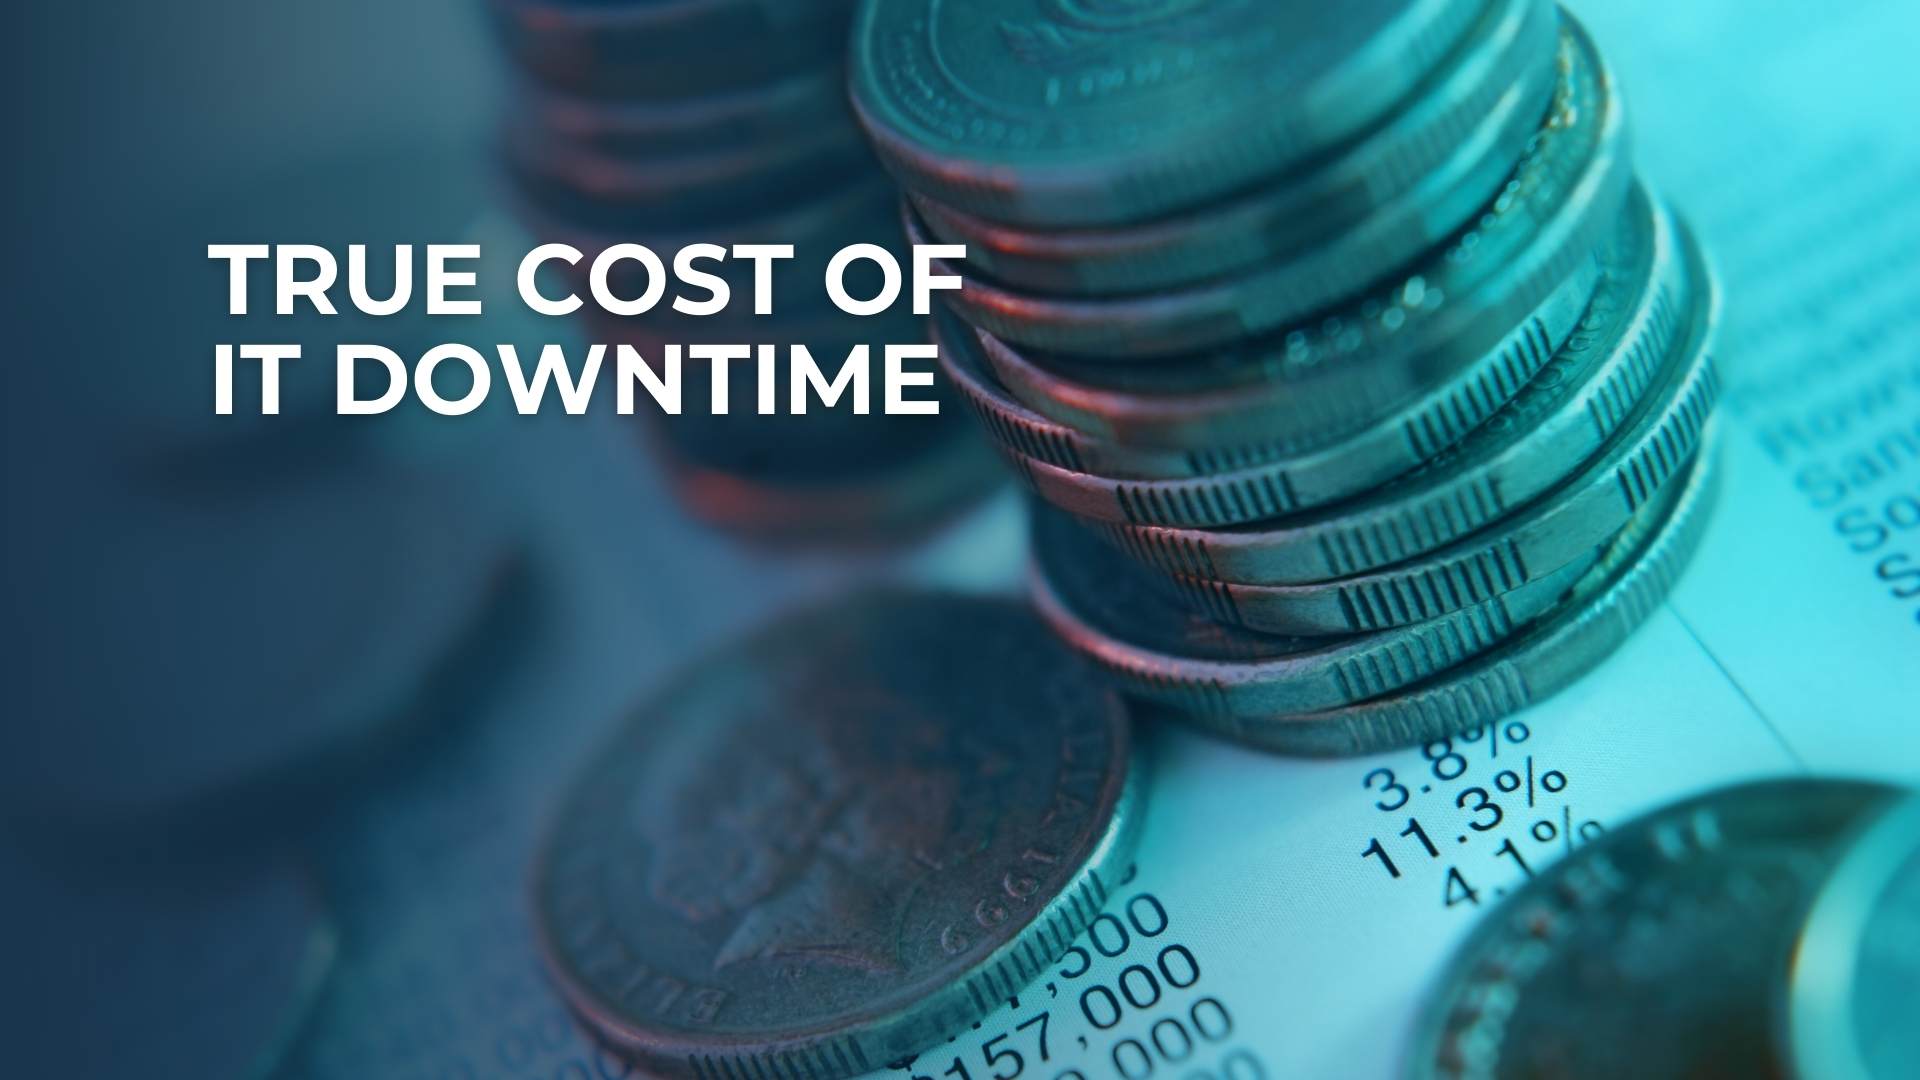 True Cost of IT Downtime